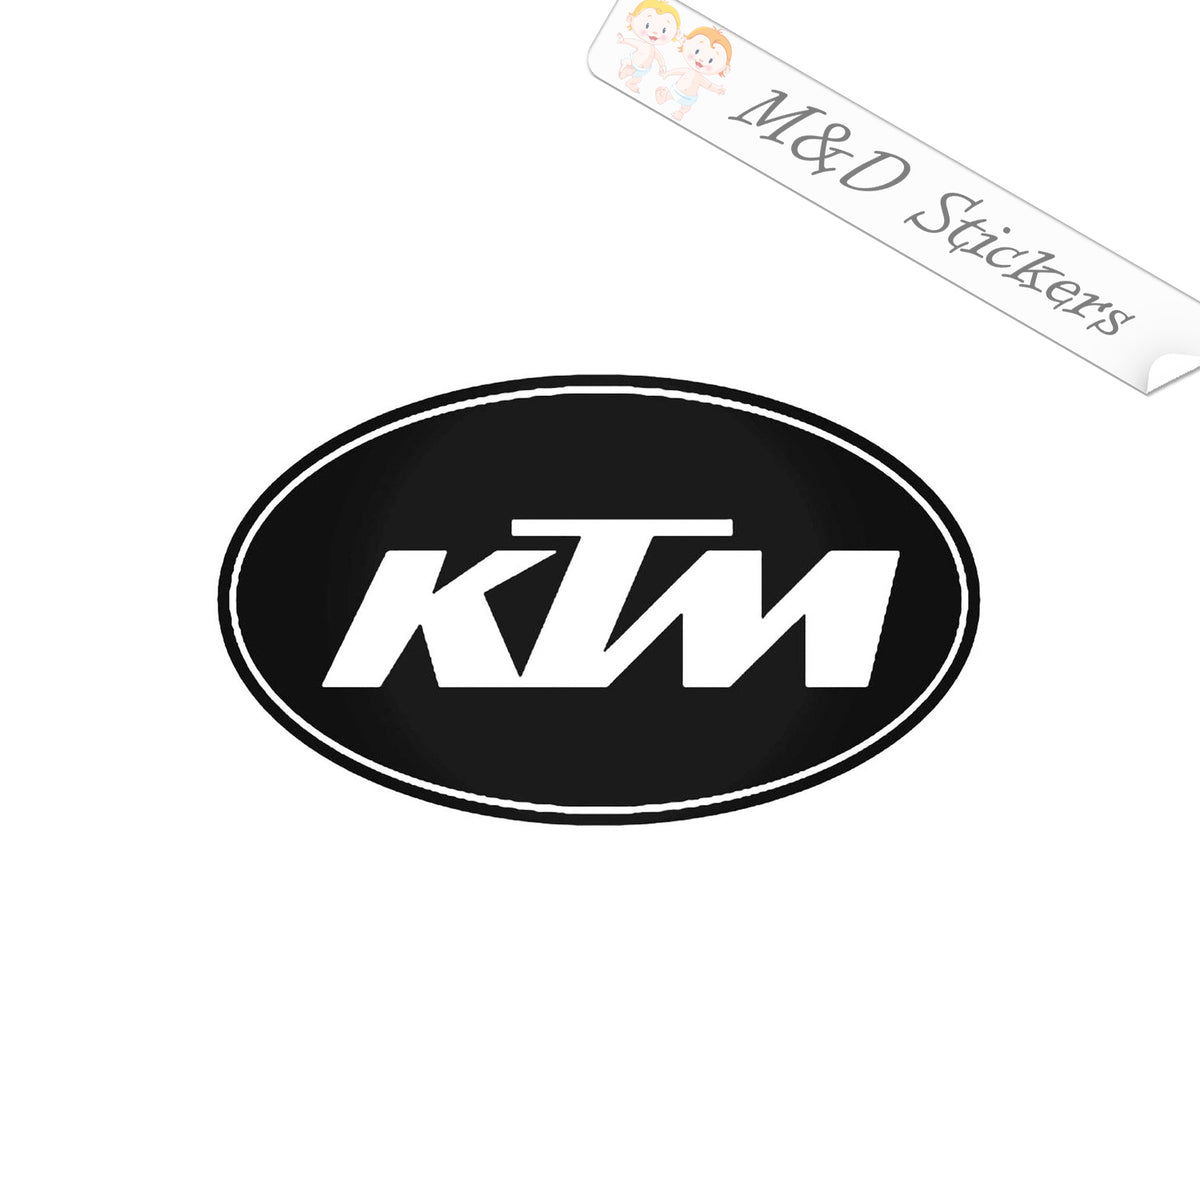 2x KTM Logo Vinyl Decal Sticker Different colors & size for Cars/Bikes